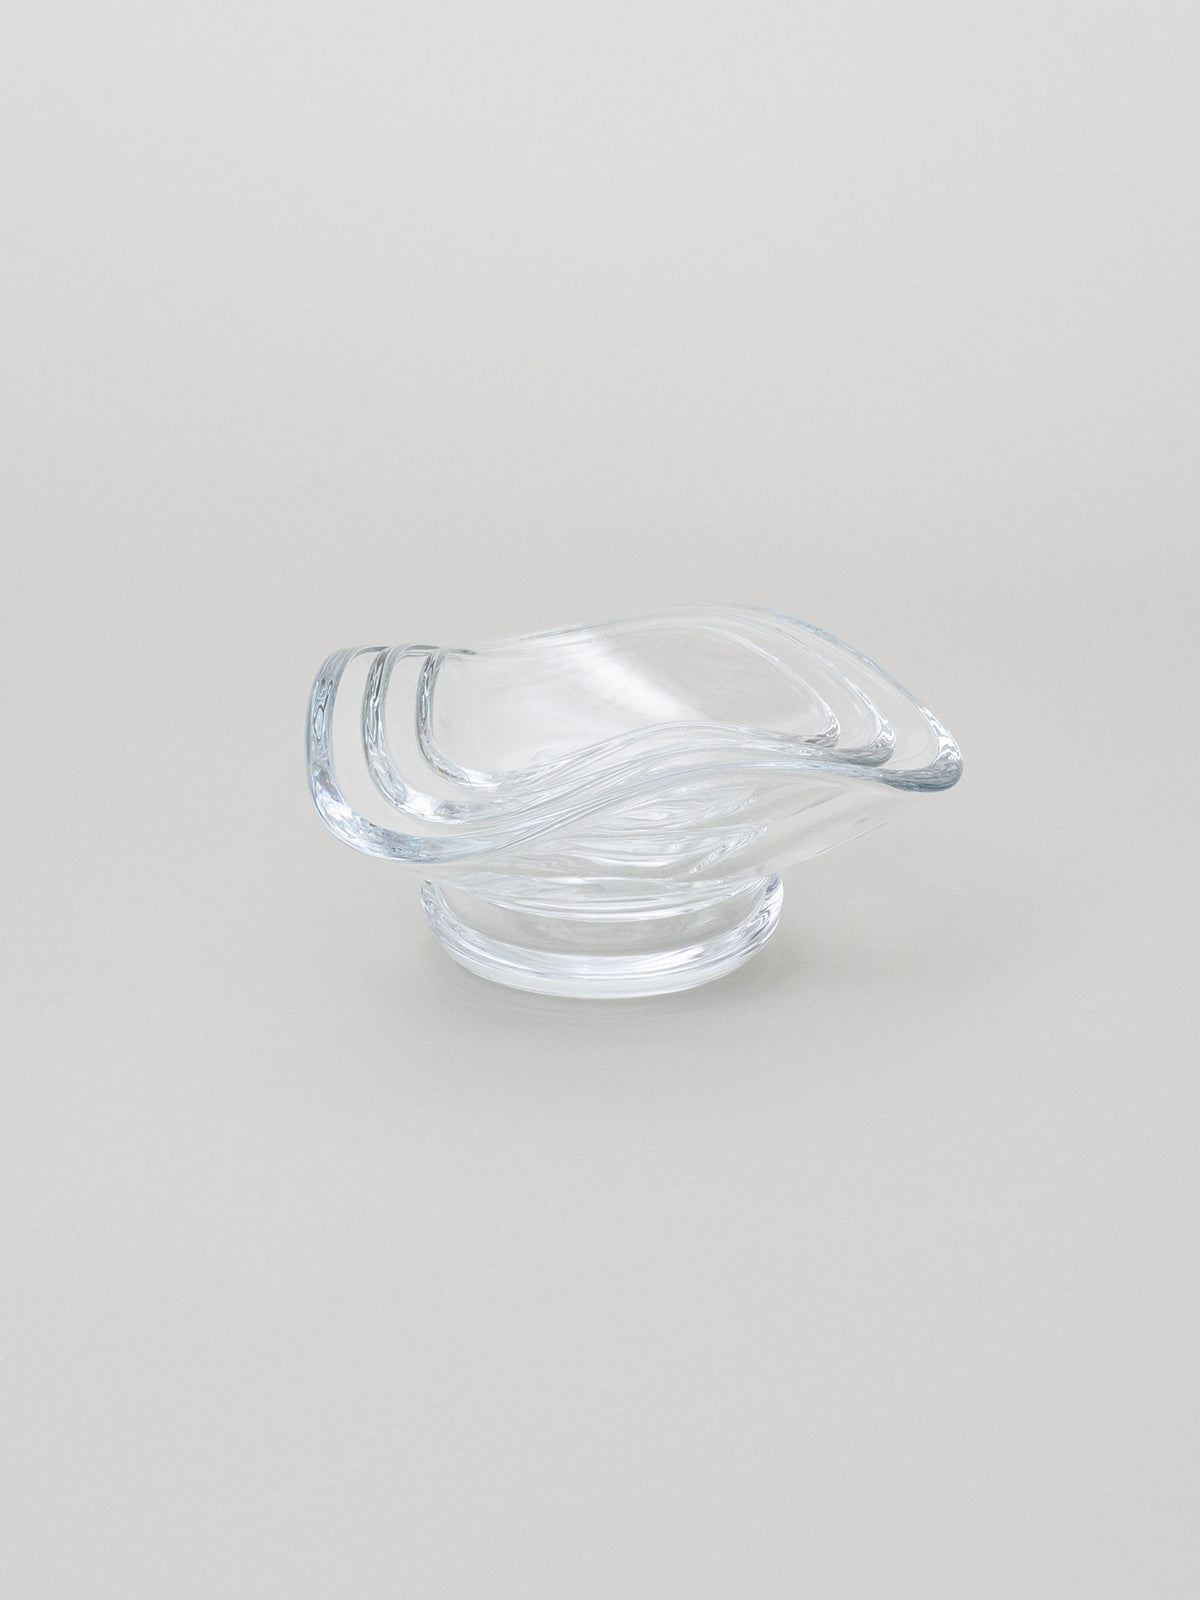 Urch Glass Decorative Bowls (Set of 3), Clear